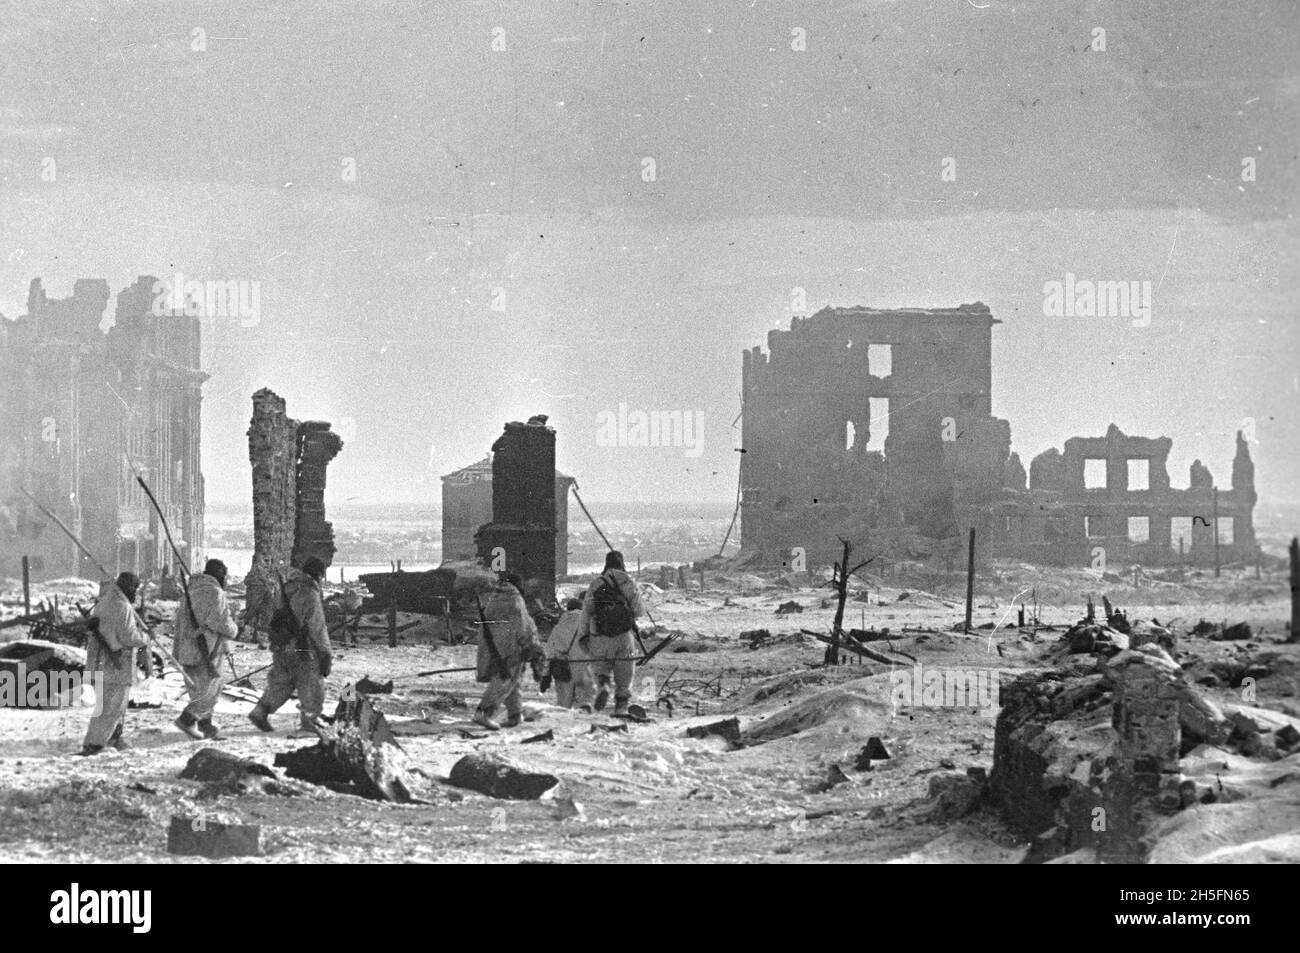 STALINGRAD, RUSSIA - 02 February 1943 - Red Army soldiers in the ruins of Stalingrad, Russia shortly after the end of the Battle of Stalingrad. One of Stock Photo